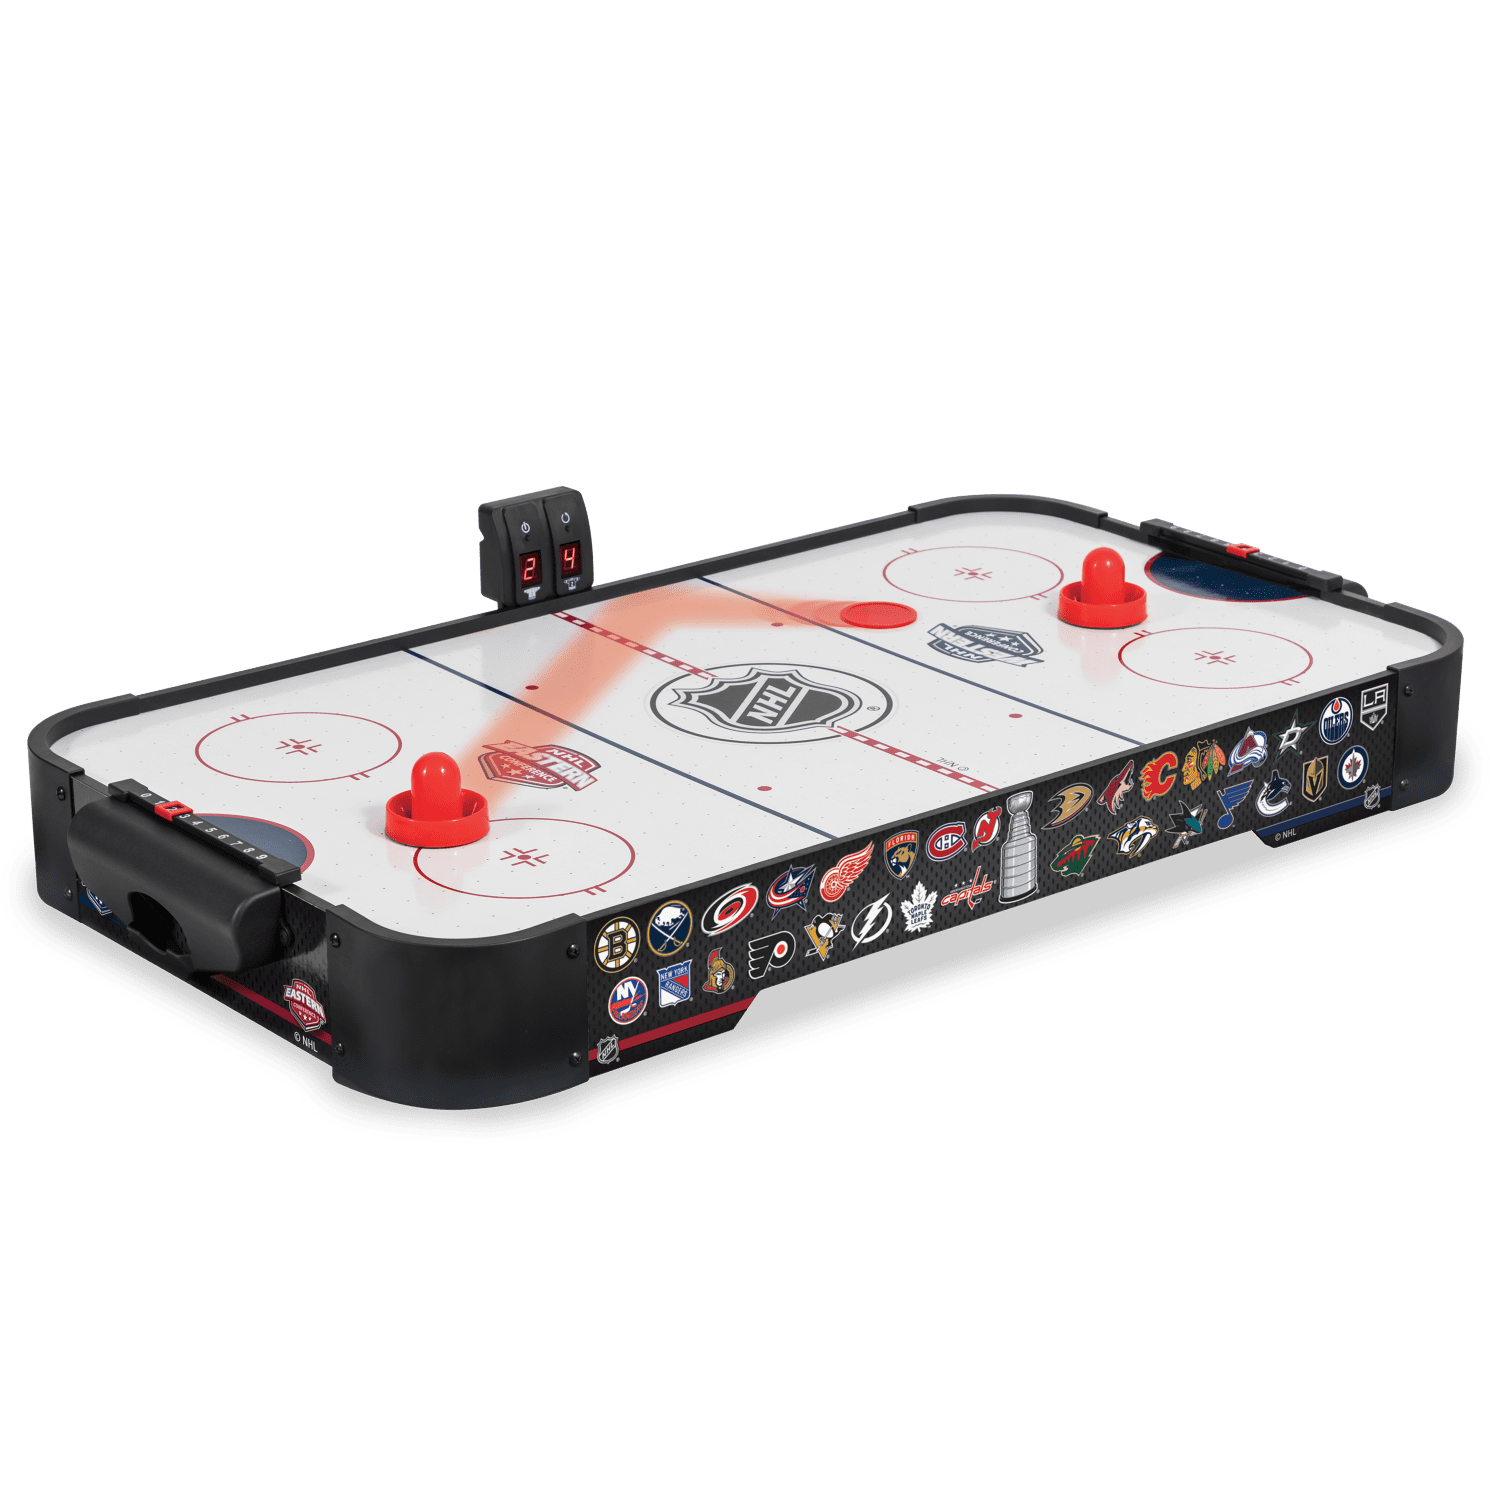 Nhl Fury 36 Table Top Air Hockey Game With Led Scoring And Pucks And Pushers Included